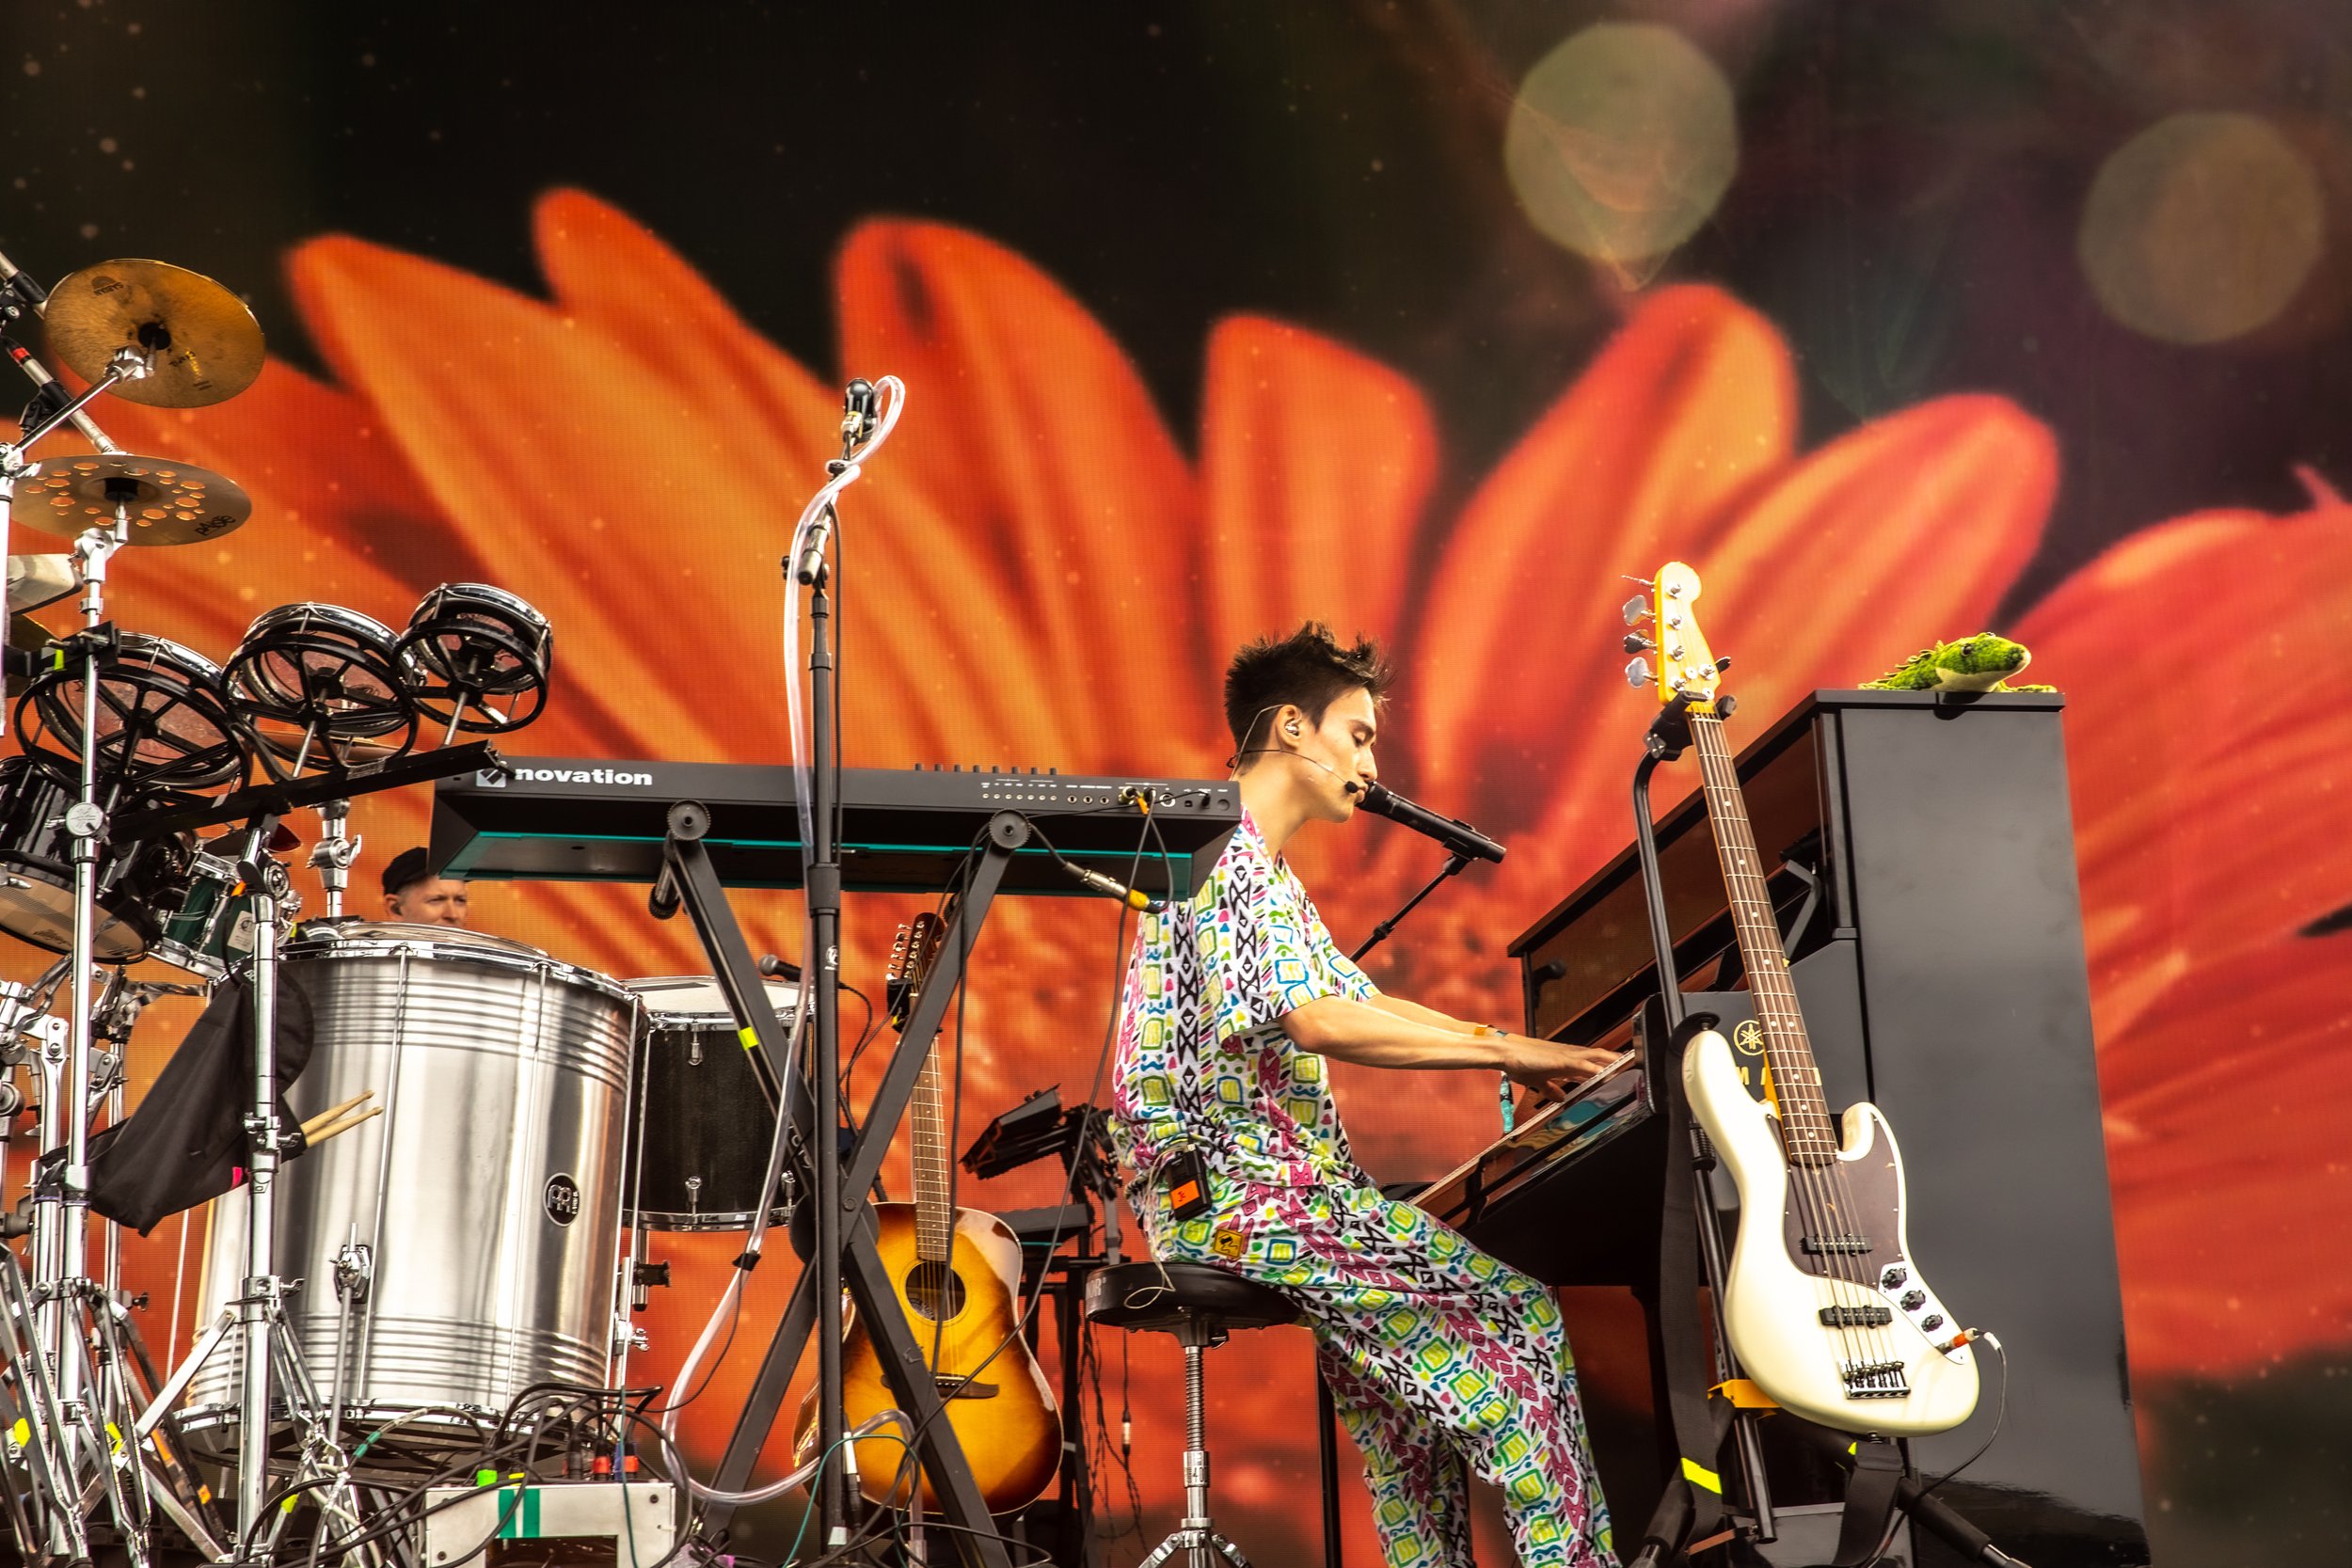 210918_JacobCollier_NancyDHuynh008.JPG